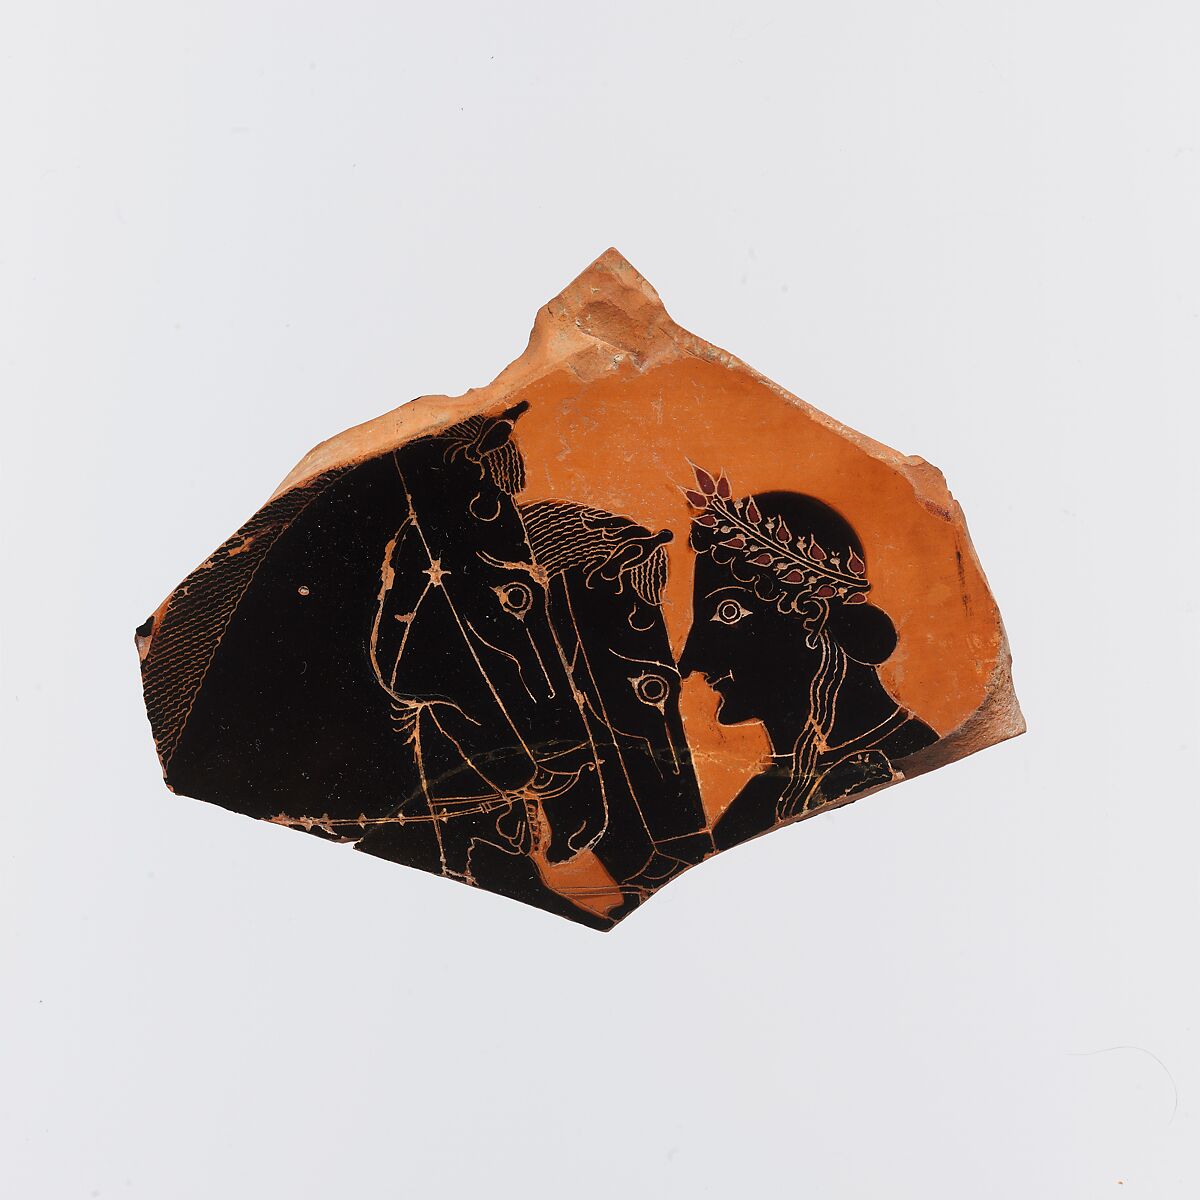 Fragment of a terracotta amphora (jar), Attributed possibly to the Painter of Vatican 365, Terracotta, Greek, Attic 